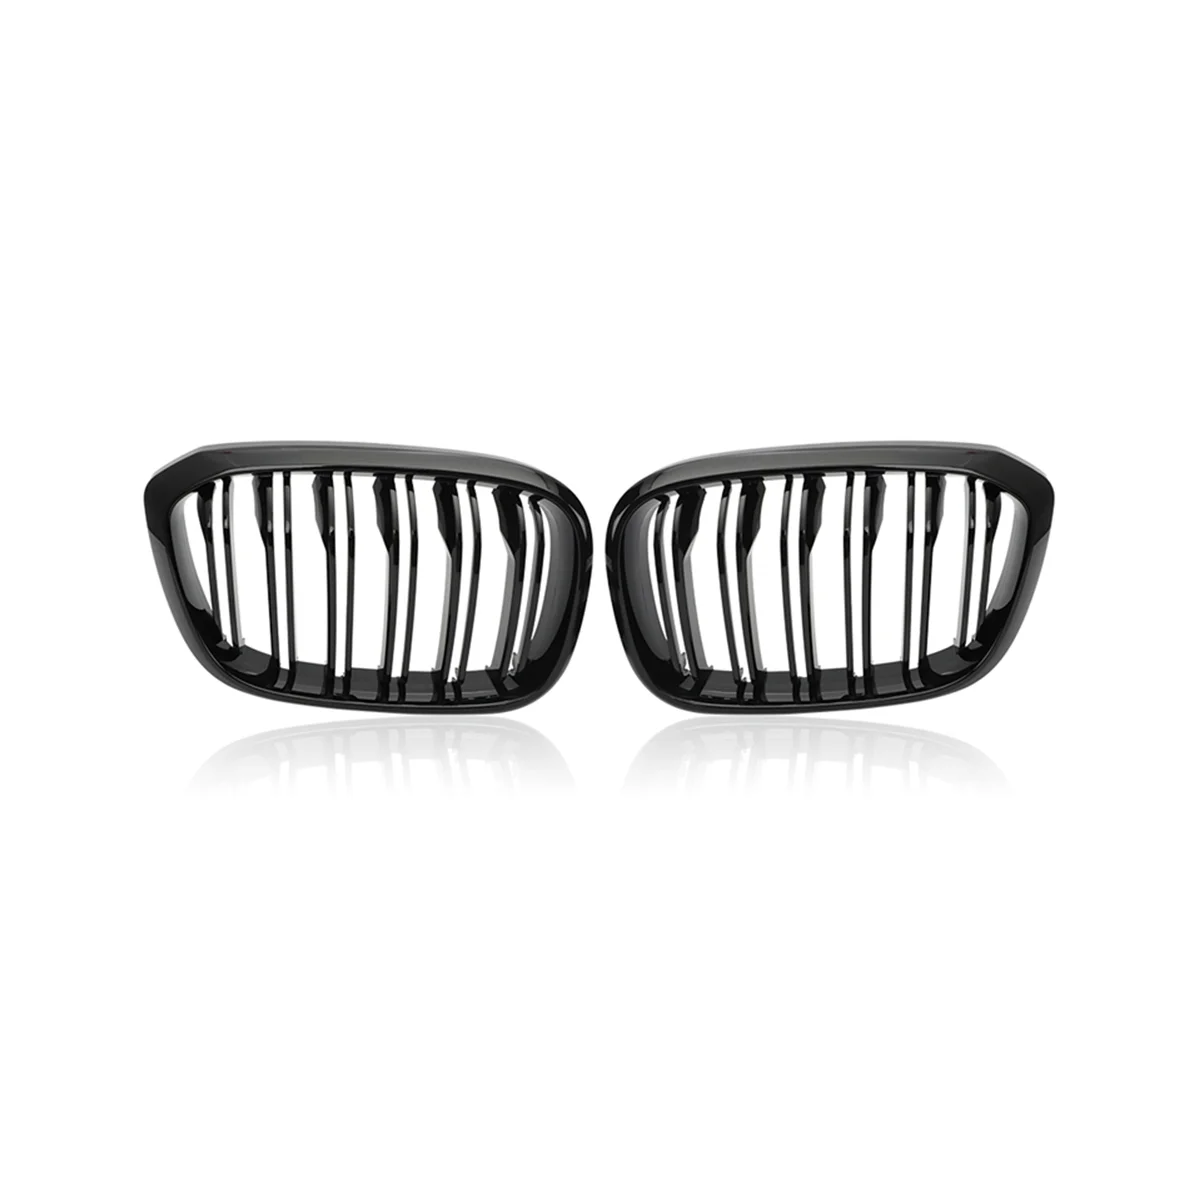 

Double Slat Grille Kidney Grill Grille Center Grille Intake Grille Car for BMW 3 4 X3 G01 G08 X4 G02 2018-2021